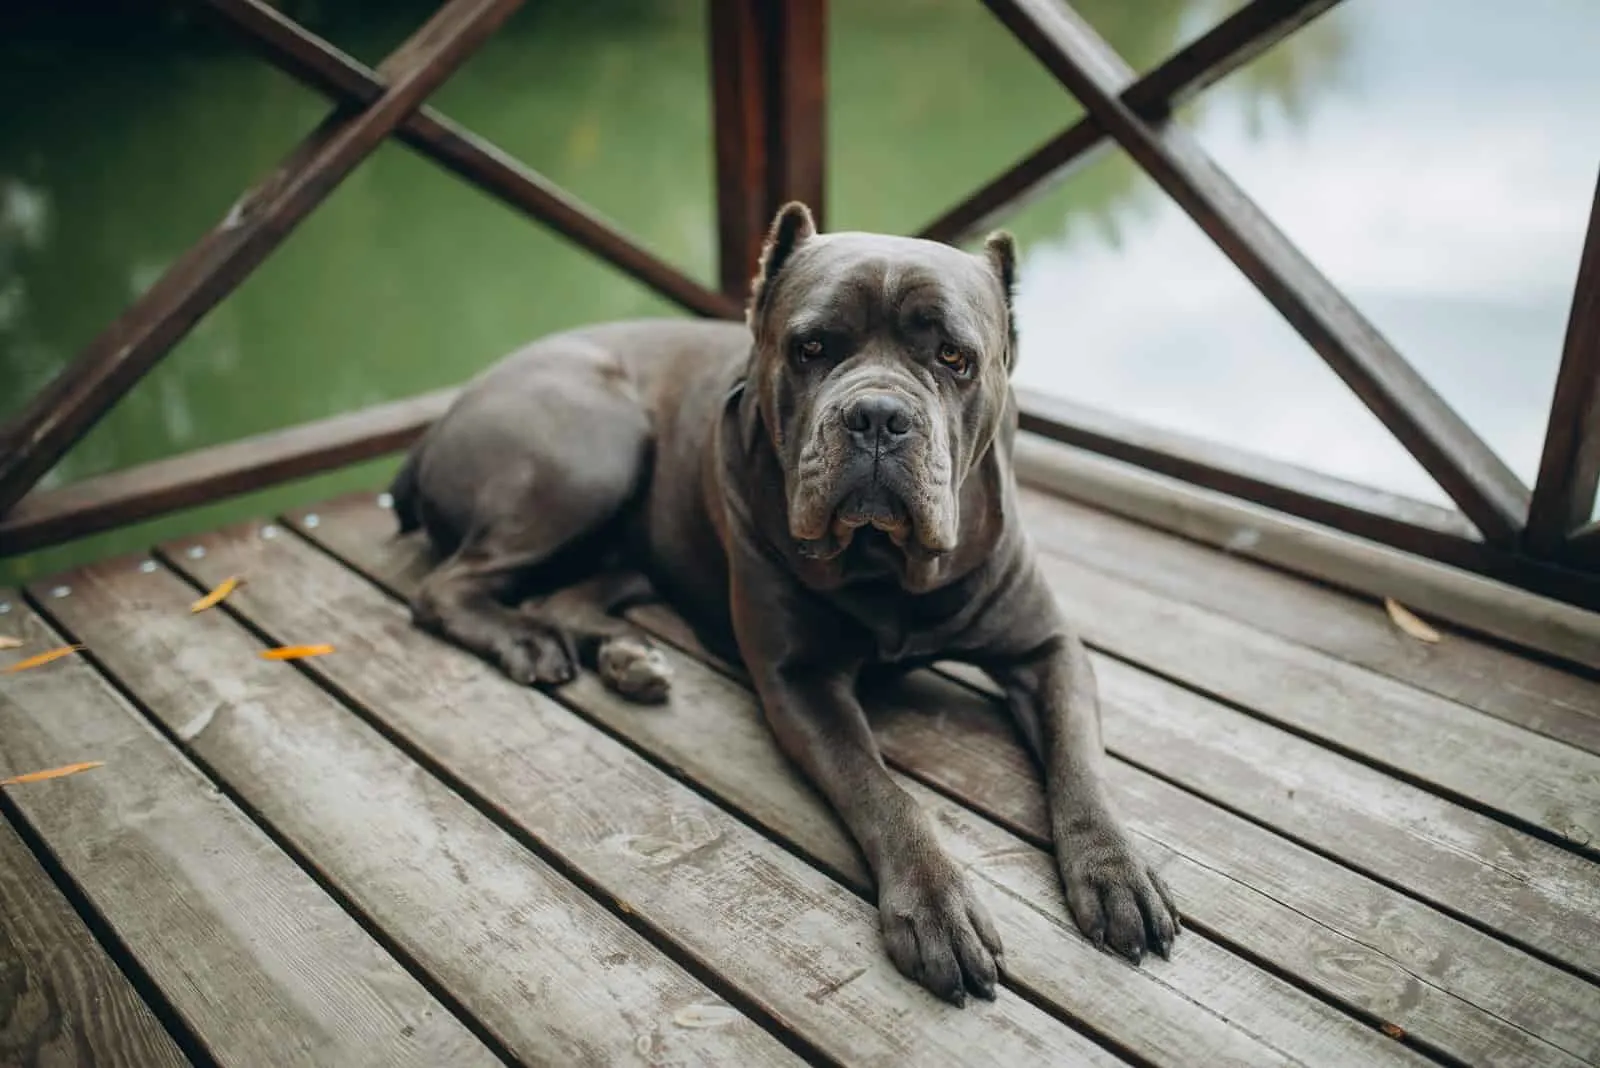 cane corso sitting on deck looking at camera